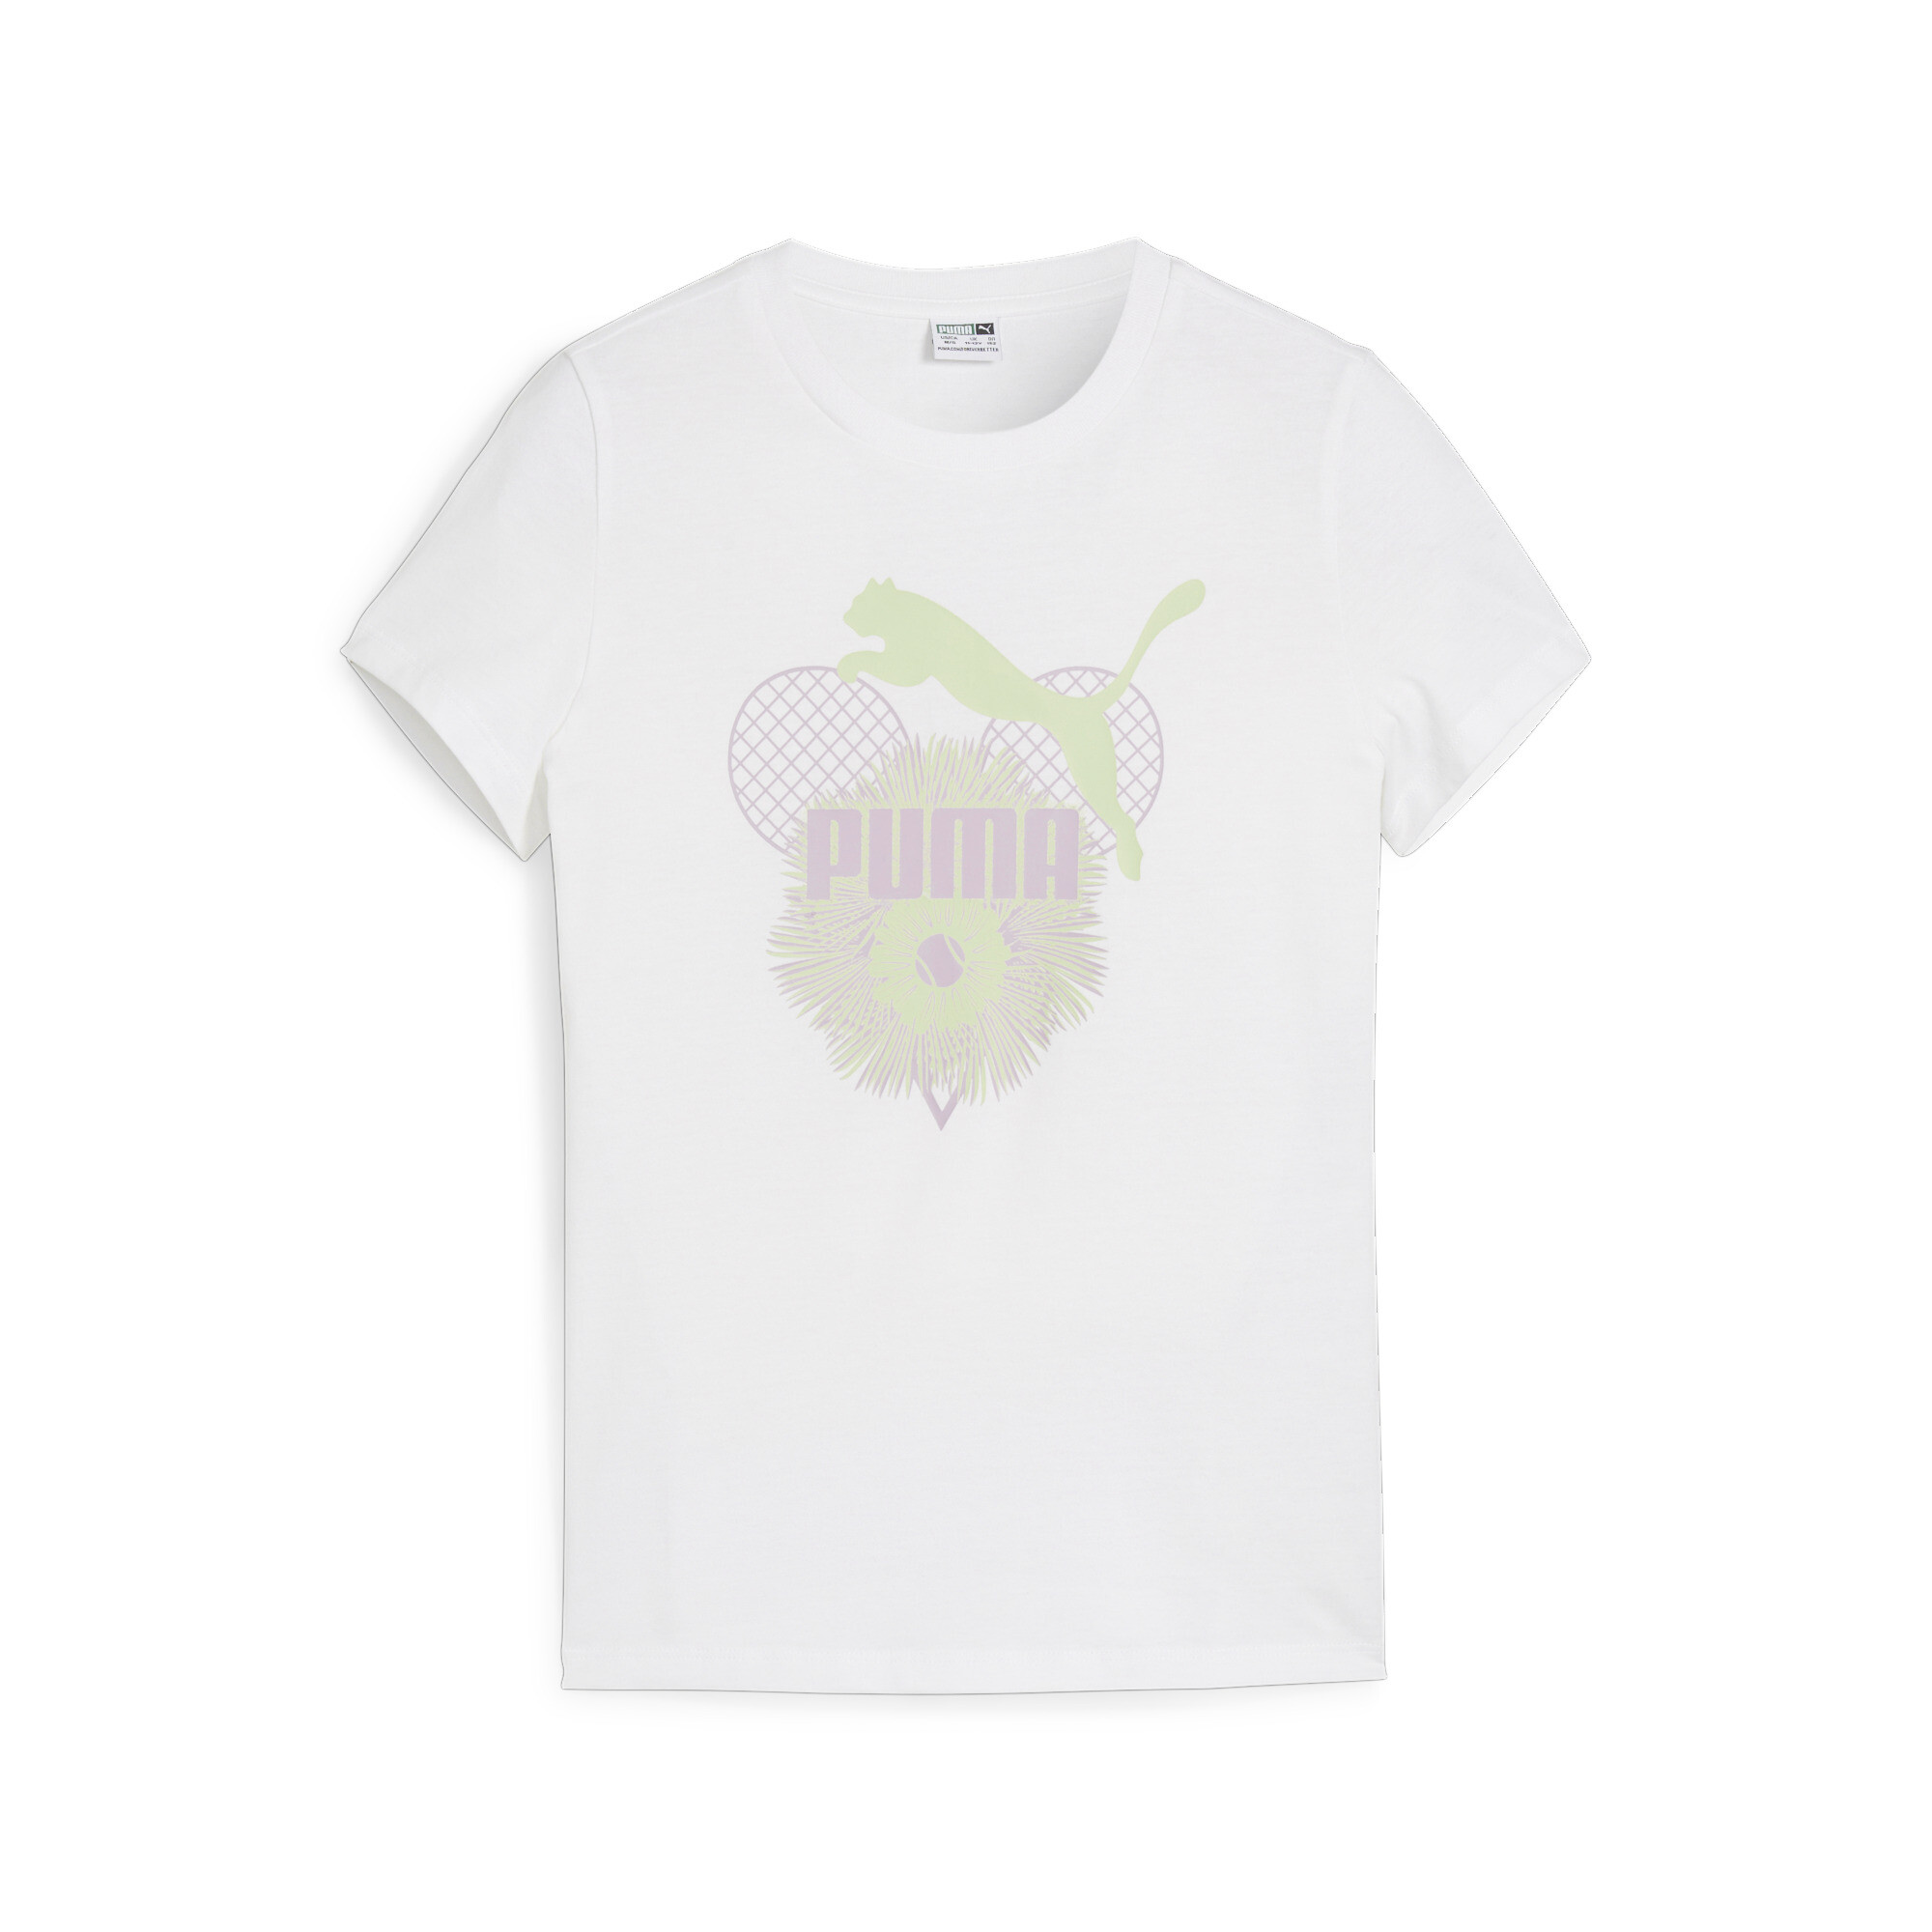 PUMA GRAPHICS MTCH PNT T-Shirt In White, Size 9-10 Youth